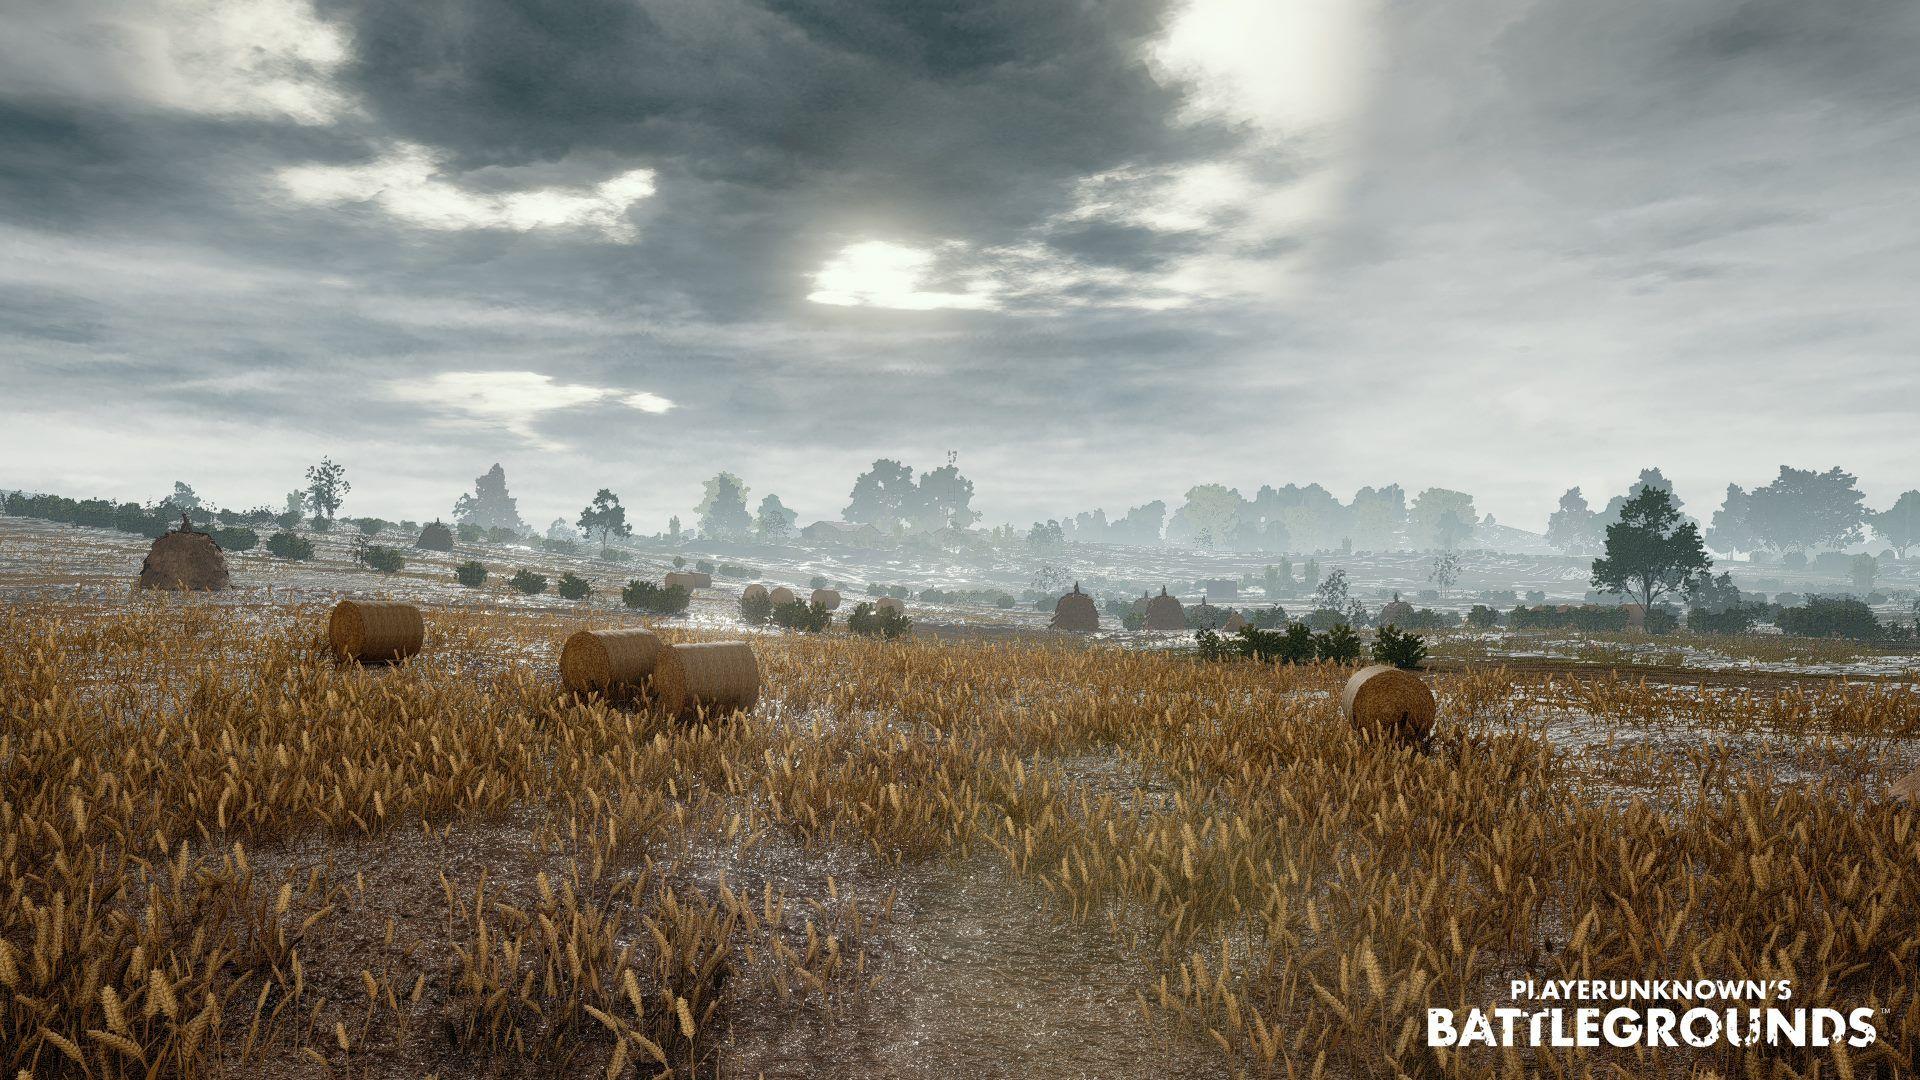 PLAYERUNKNOWN'S BATTLEGROUNDS Background, Picture, Image